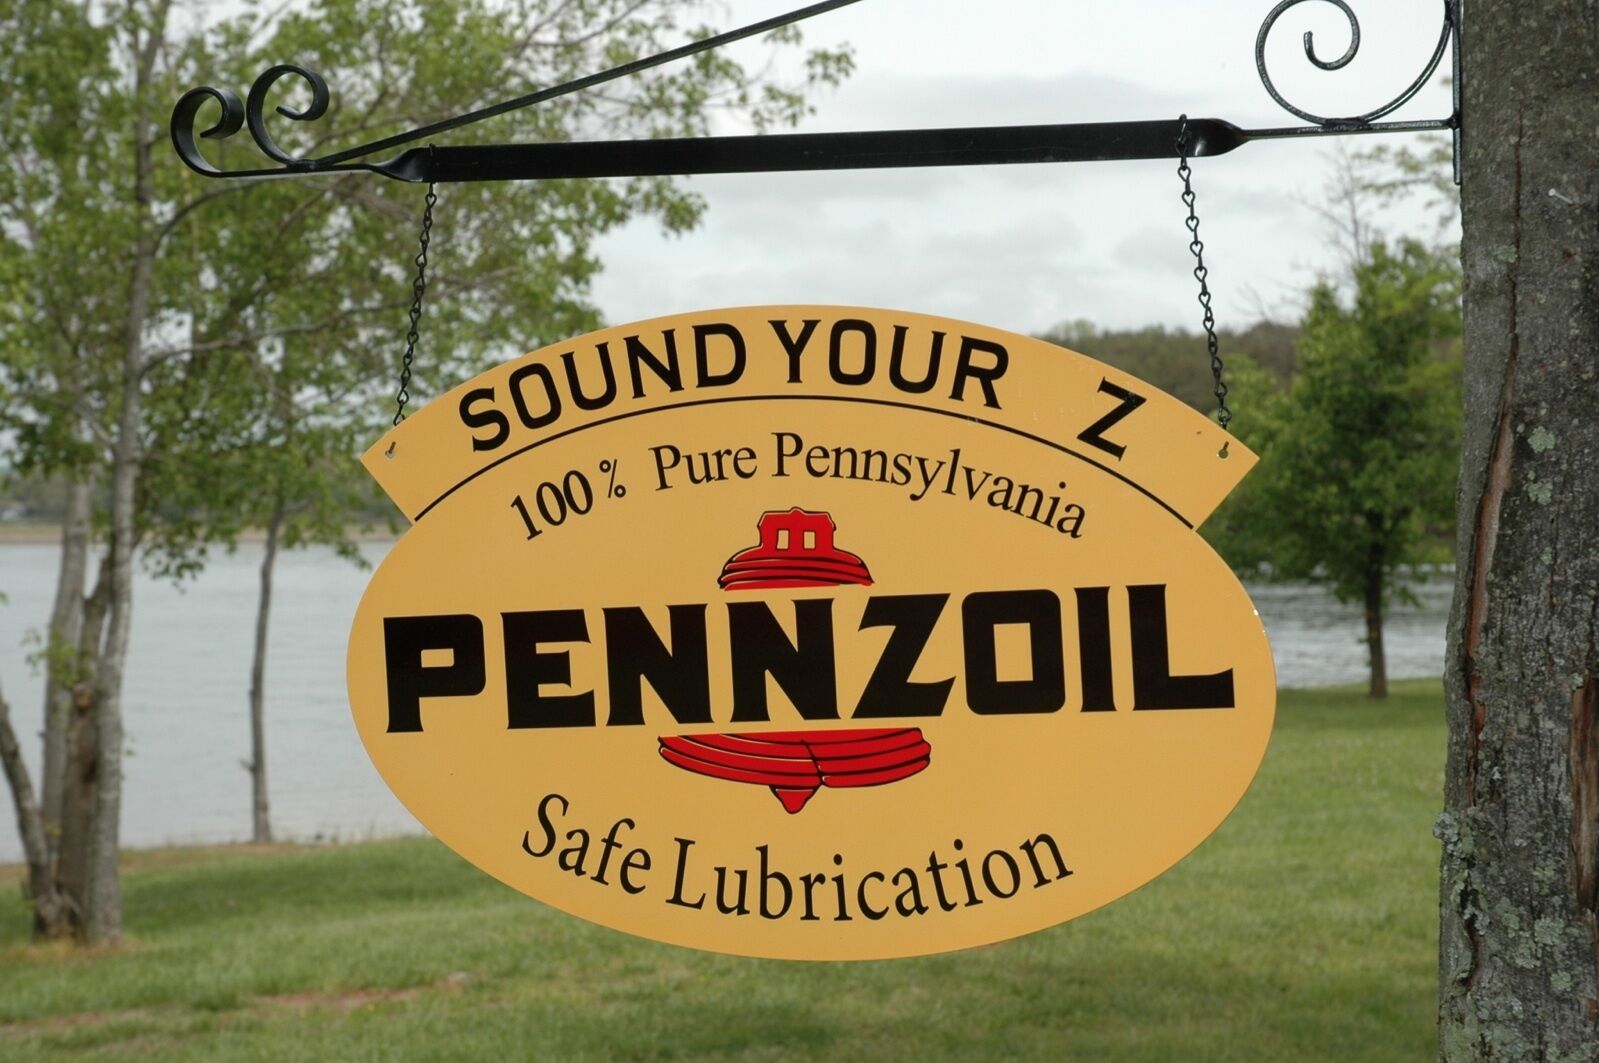 OLD STYLE PENNZOIL "SOUND YOUR Z" MOTOR OIL TWO-SIDED SWINGER SIGN MADE IN USA! Без бренда - фотография #6